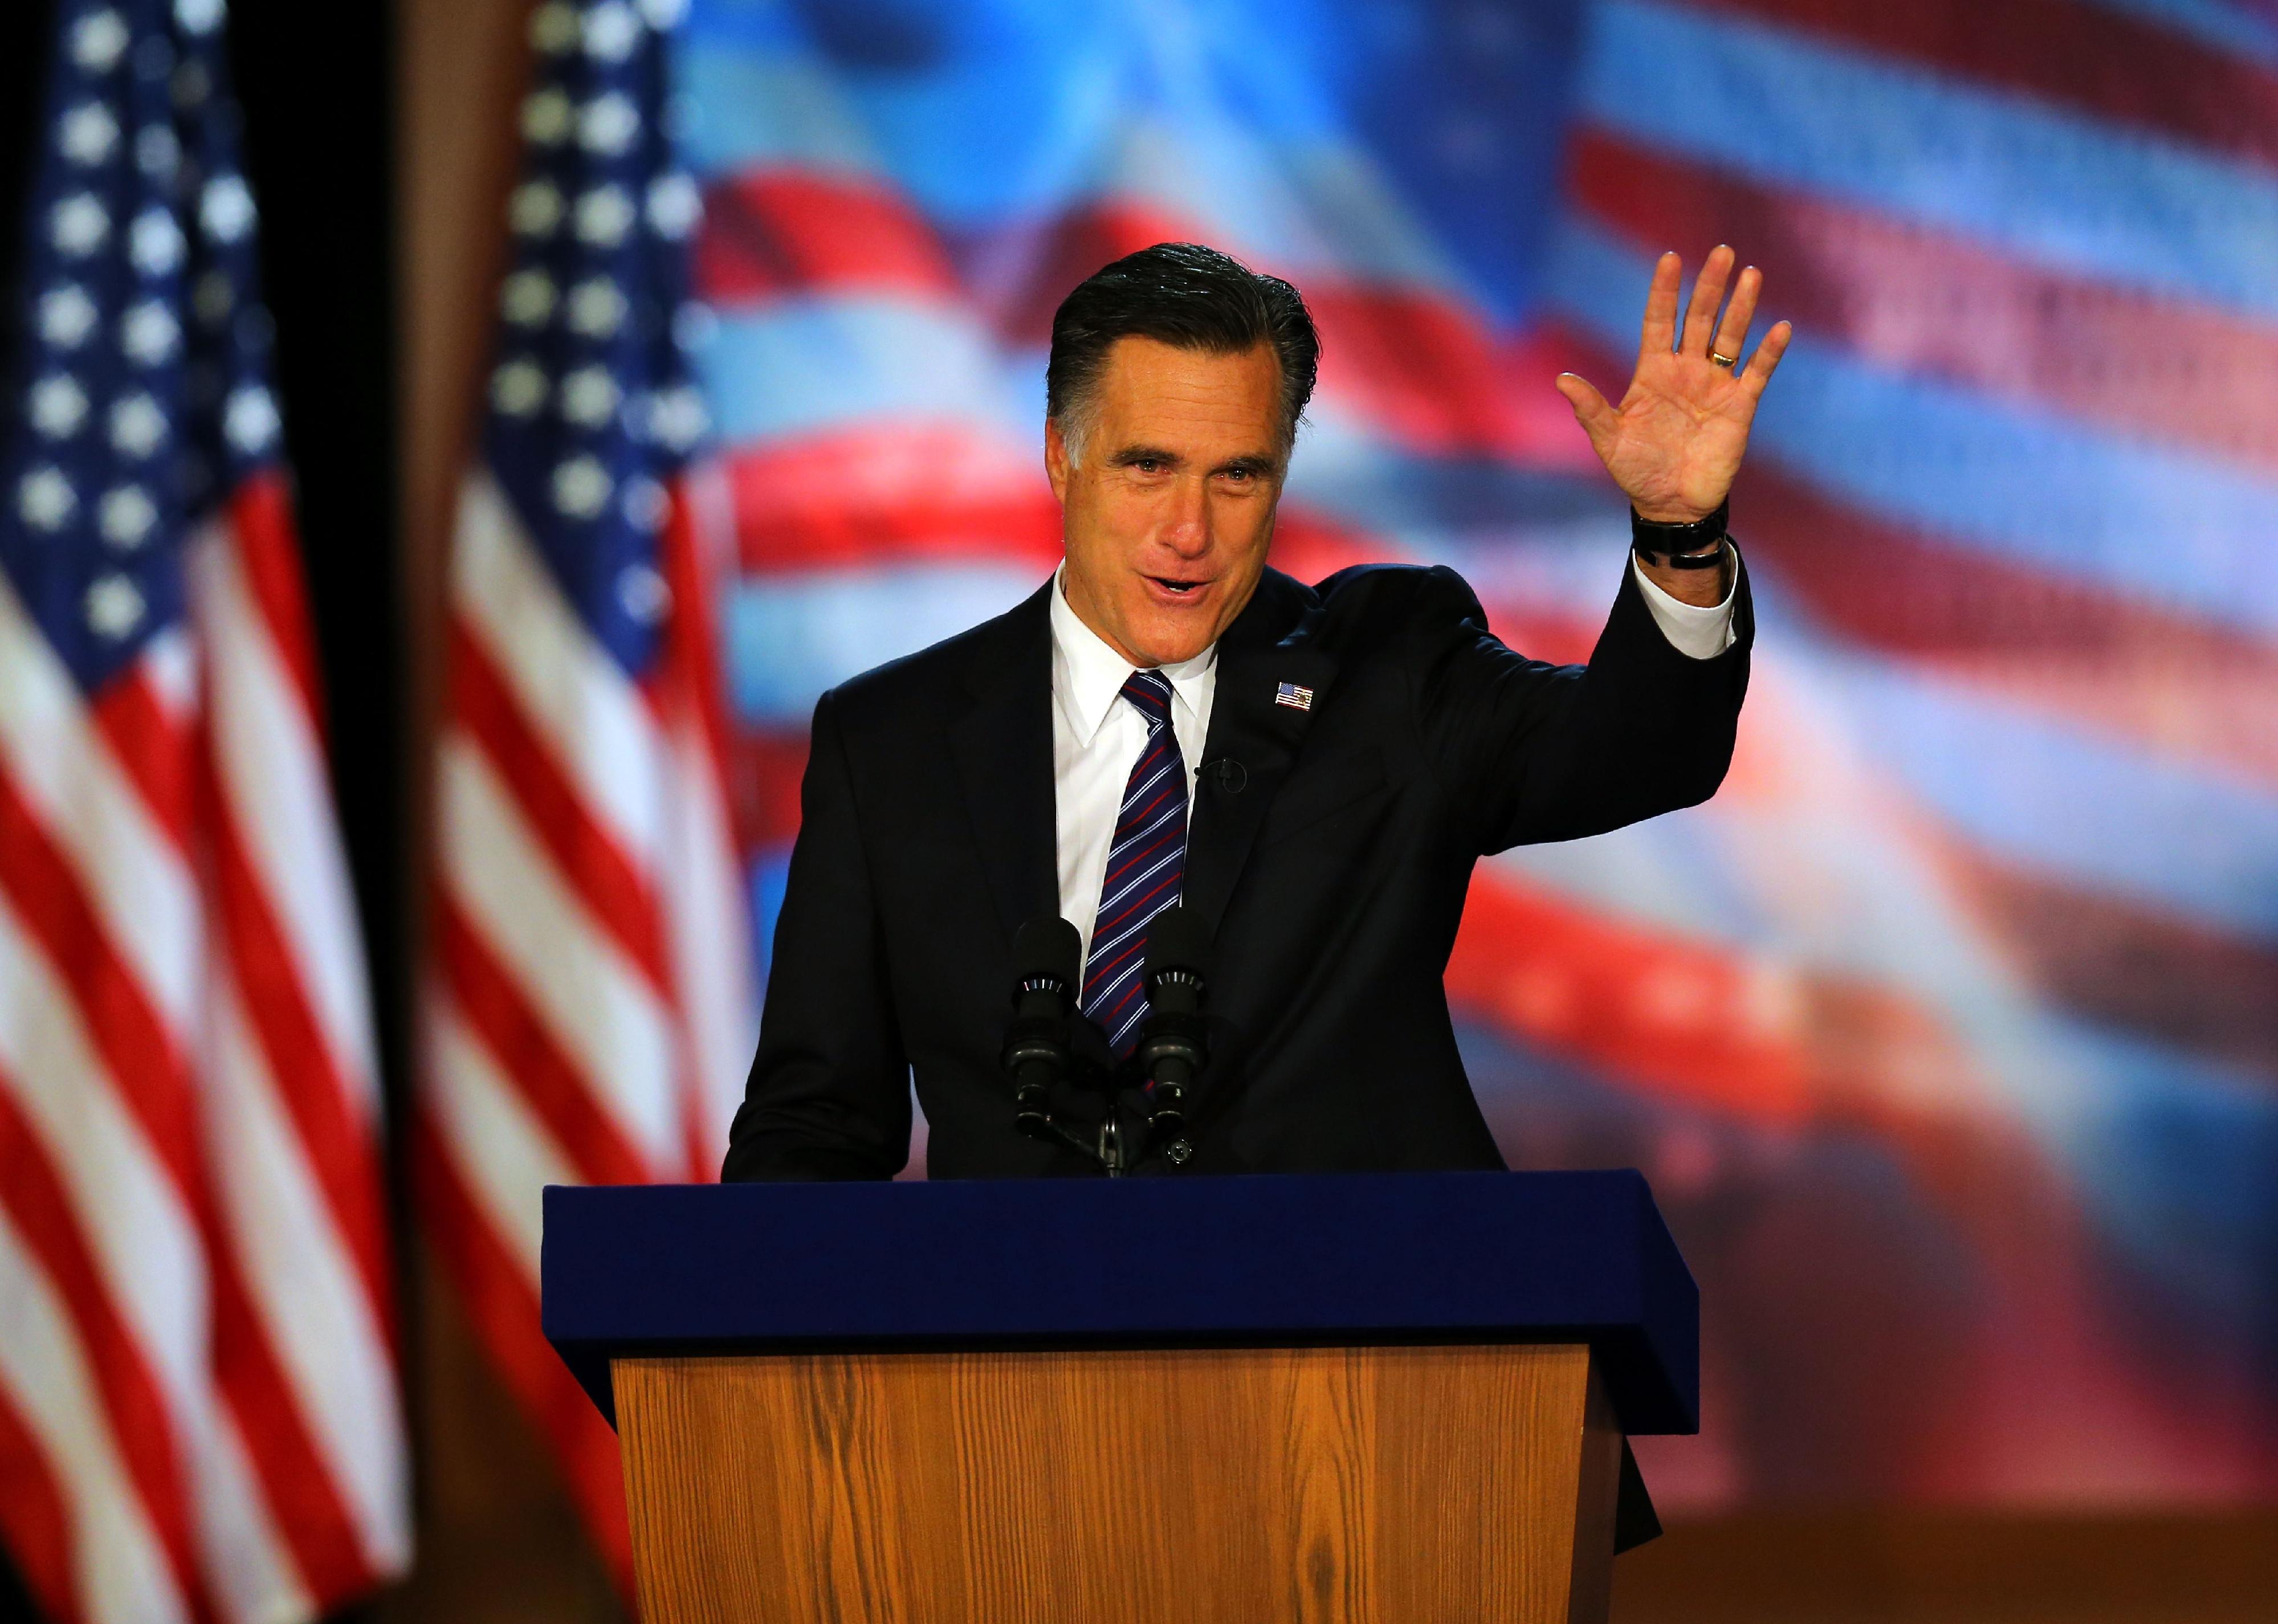 Mitt Romney waving onstage during a campaign speech.